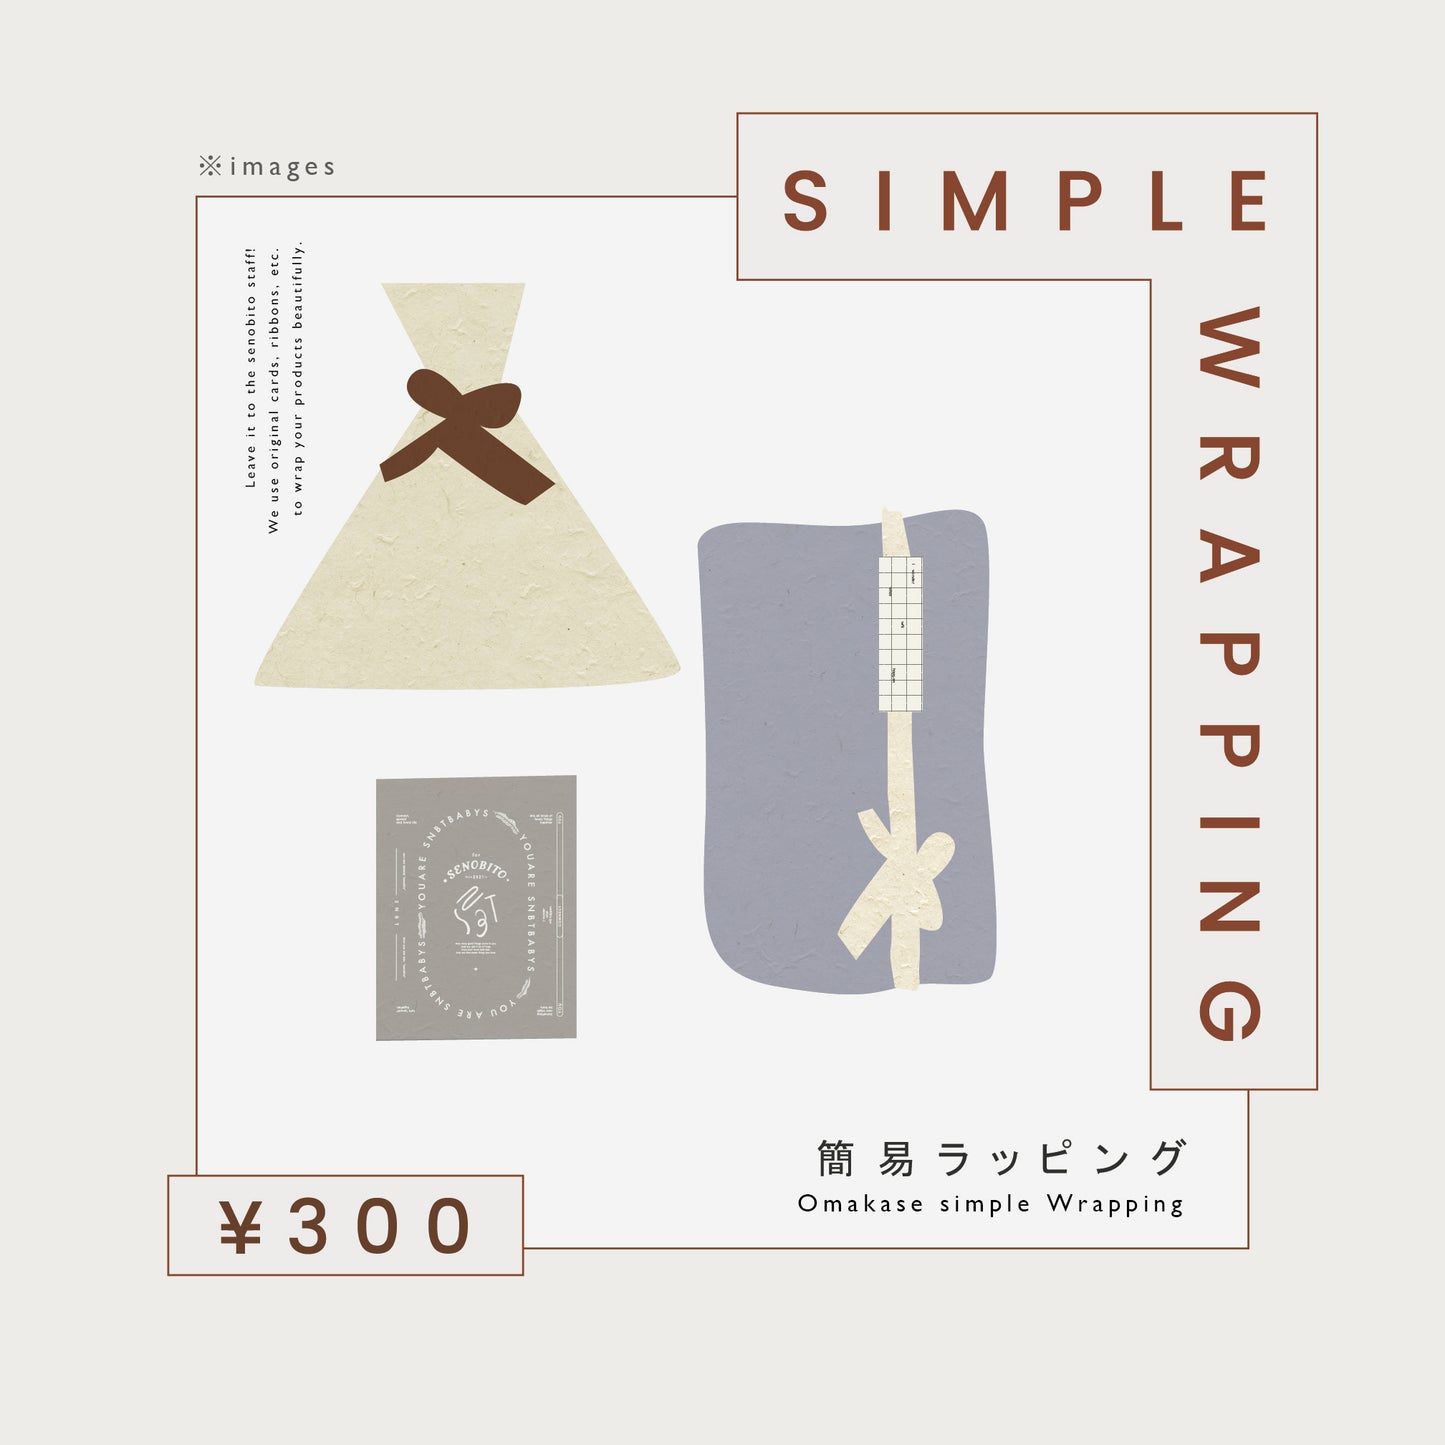 SIMPLE WRAPPING - 簡易ラッピング